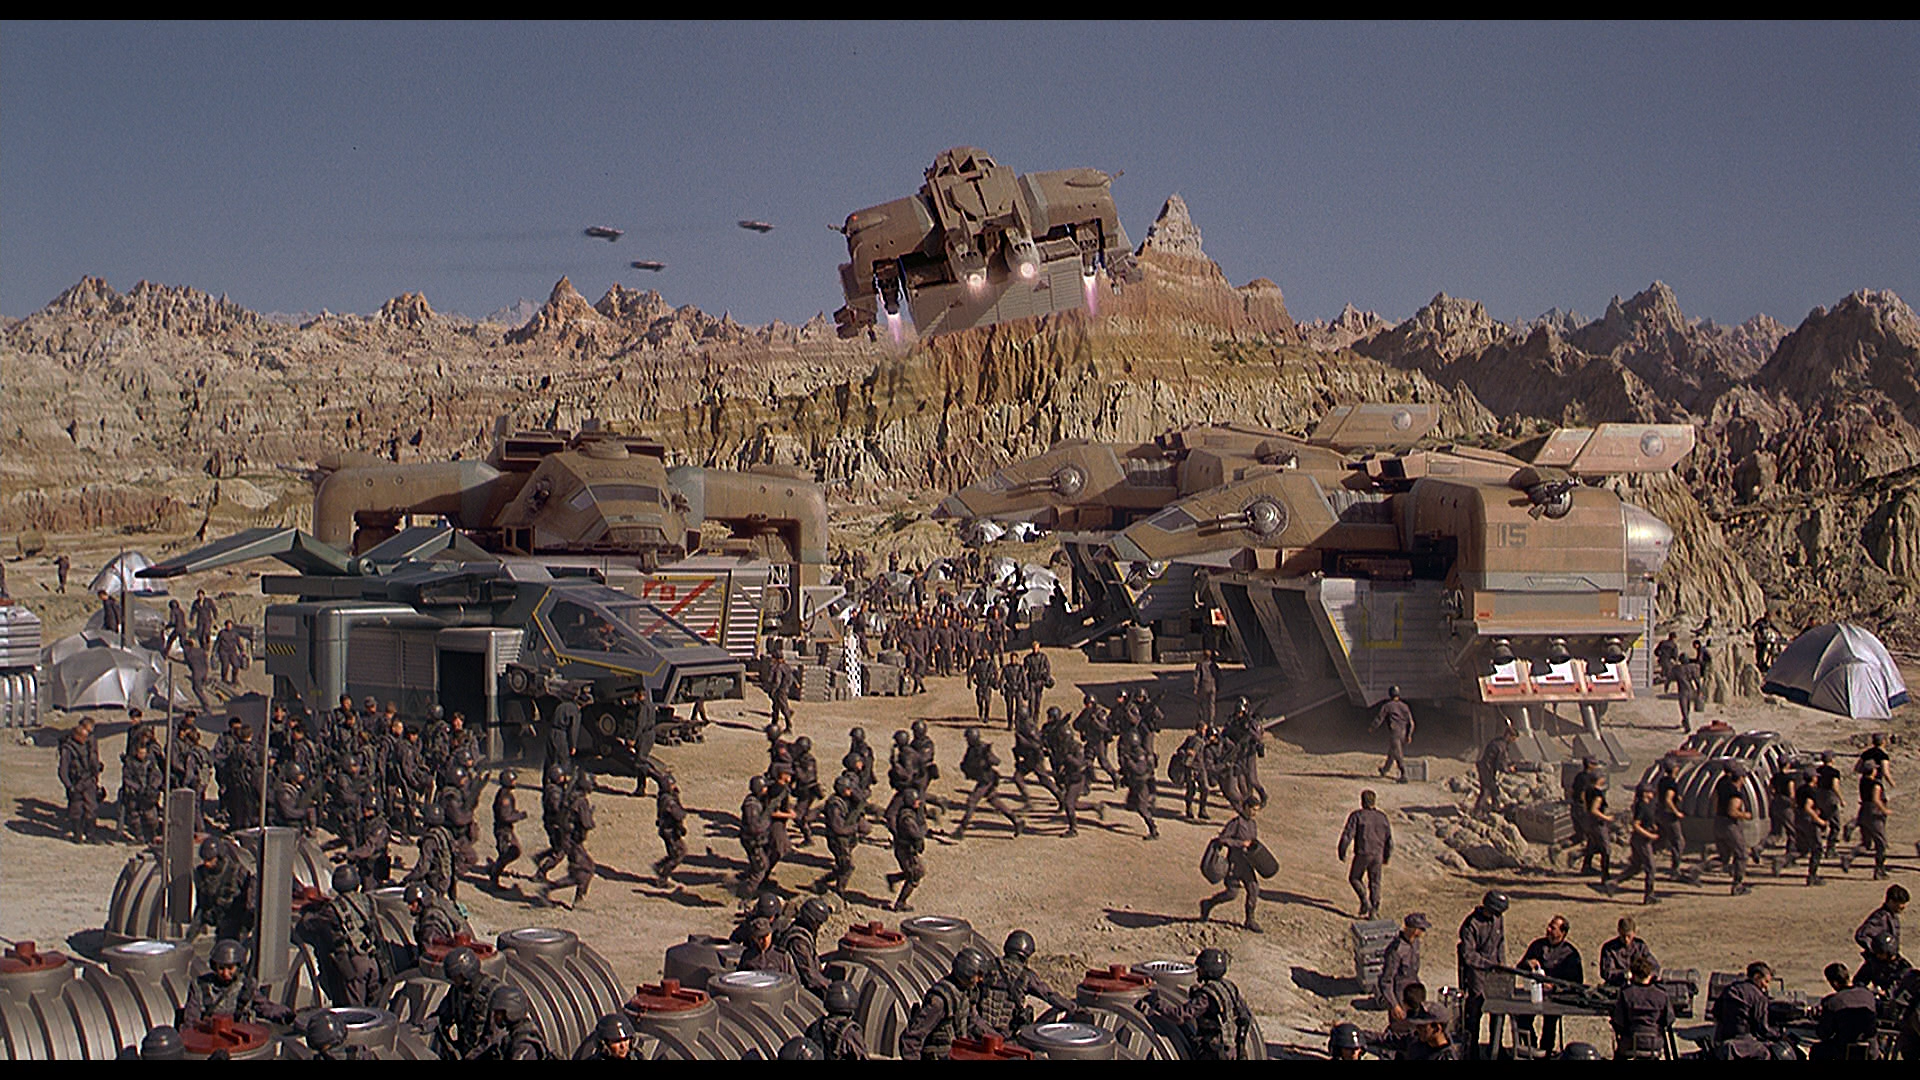 Starship Troopers Pictures & Wallpapers.